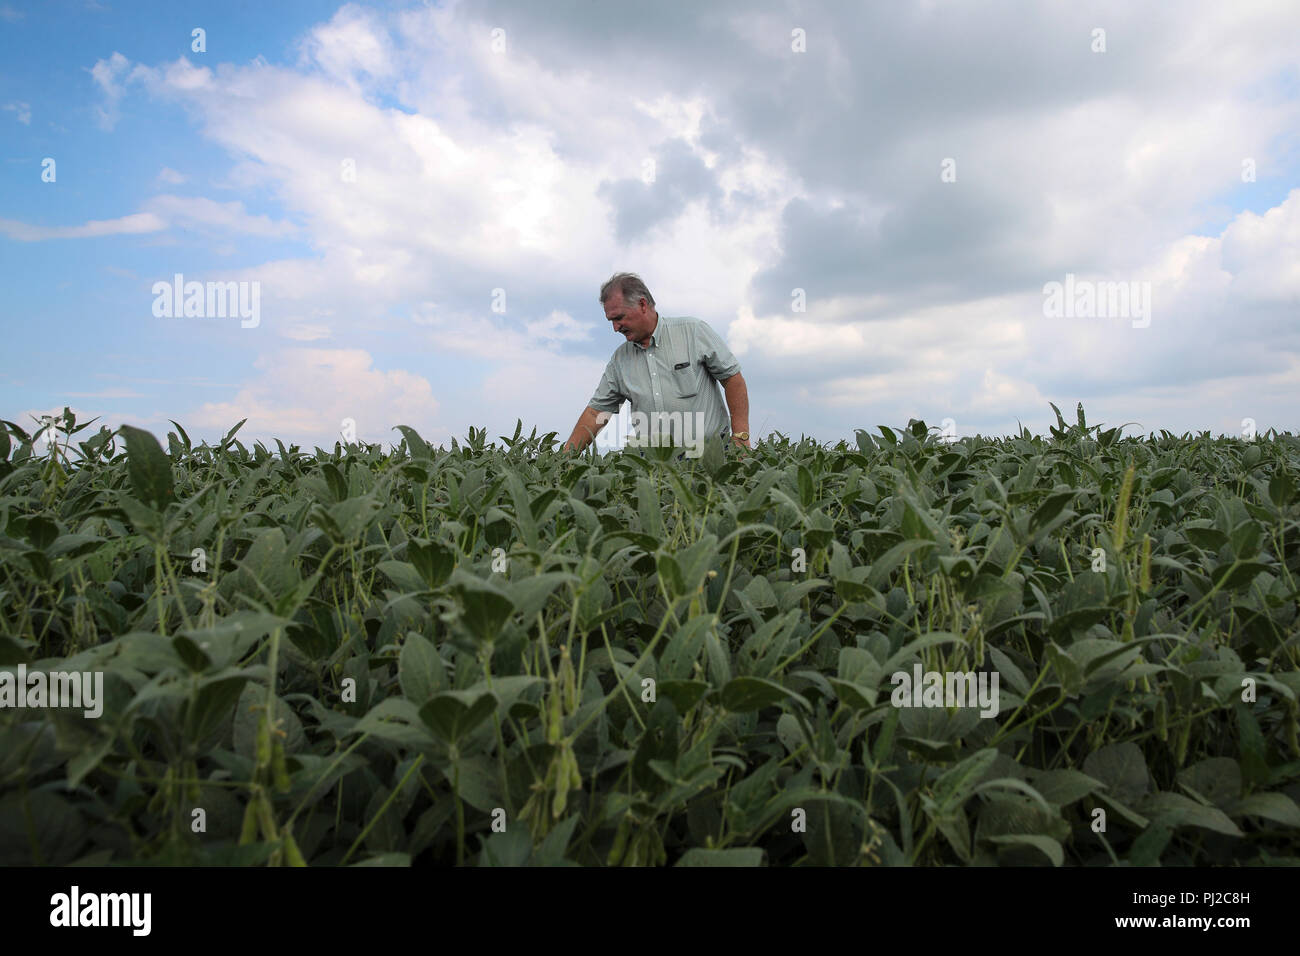 https://c8.alamy.com/comp/PJ2C8H/beijing-usa-18th-aug-2018-fred-yoder-a-fourth-generation-farmer-examines-growing-soy-beans-at-his-farm-in-plain-city-24-kilometers-away-from-worthington-in-ohio-the-united-states-aug-18-2018-to-go-with-xinhua-headlines-trumps-tariffs-make-american-farmers-anxious-as-harvest-season-draws-near-credit-wang-yingxinhuaalamy-live-news-PJ2C8H.jpg